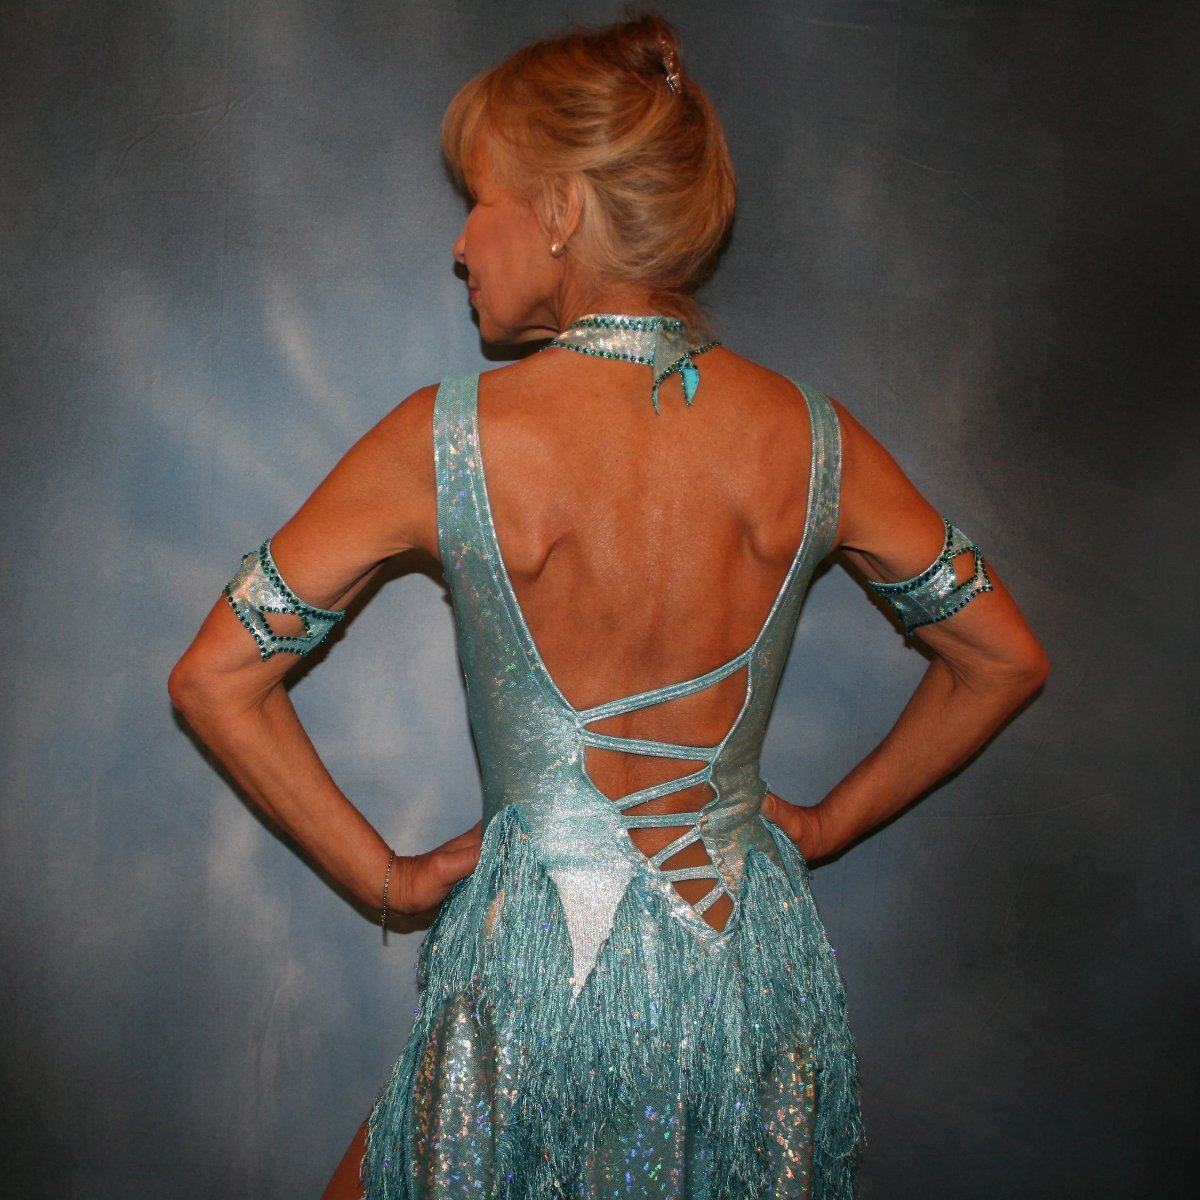 Crystal's Creations close back view of Light turquoise Latin/rhythm dance dress created in turquoise hologram metallic lycra with hologram sequined fringe, is embellished with blue zircon Swarovski rhinestones, & features cutout detailing.